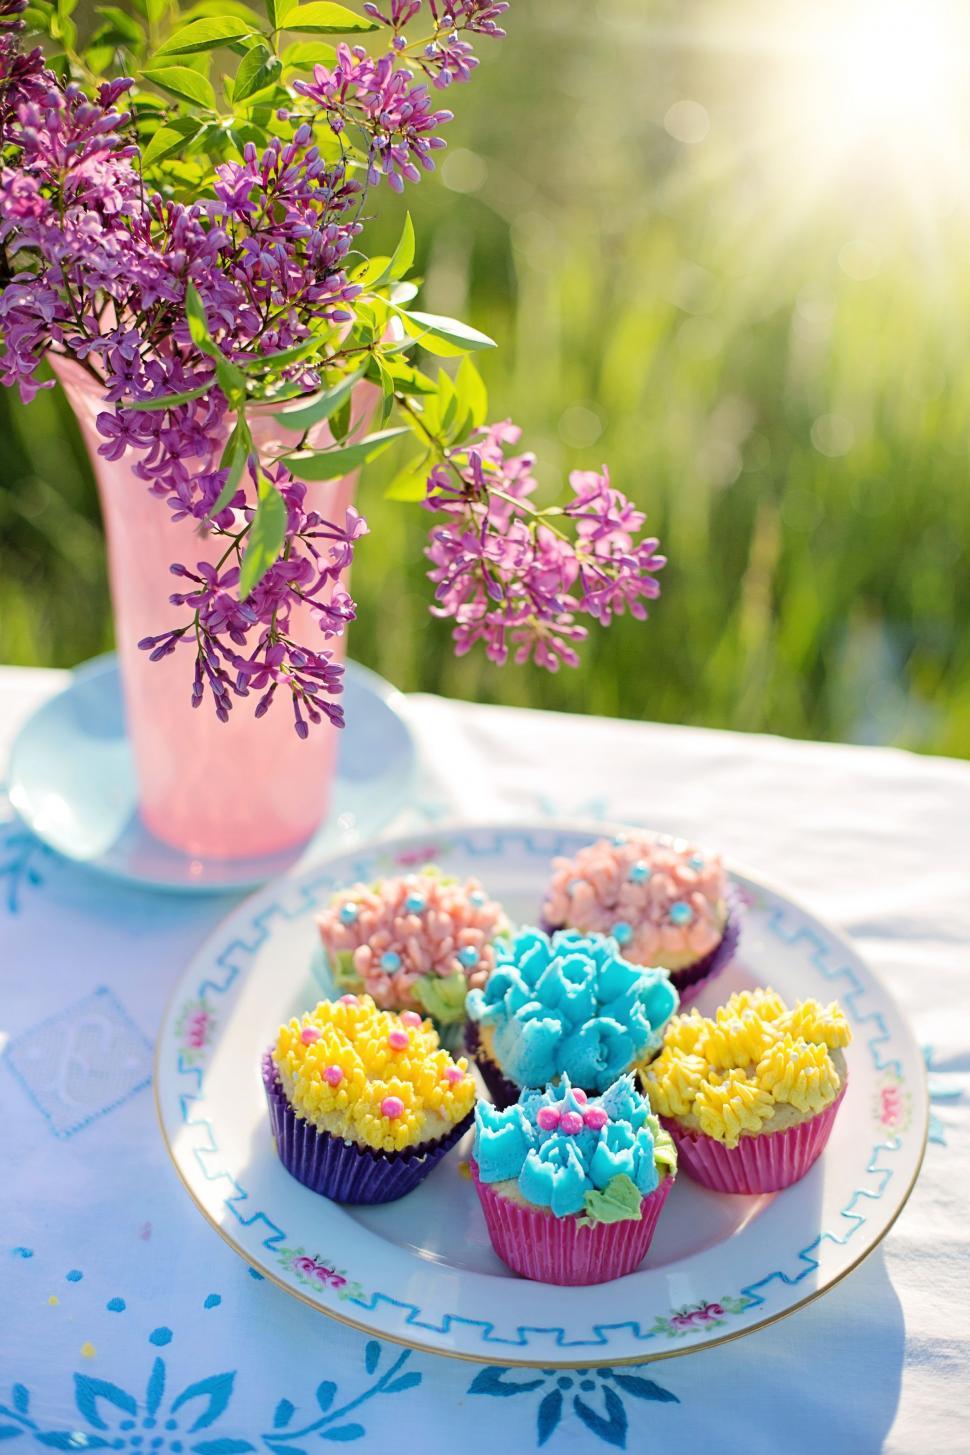 Free Image of Cupcakes and flowers 